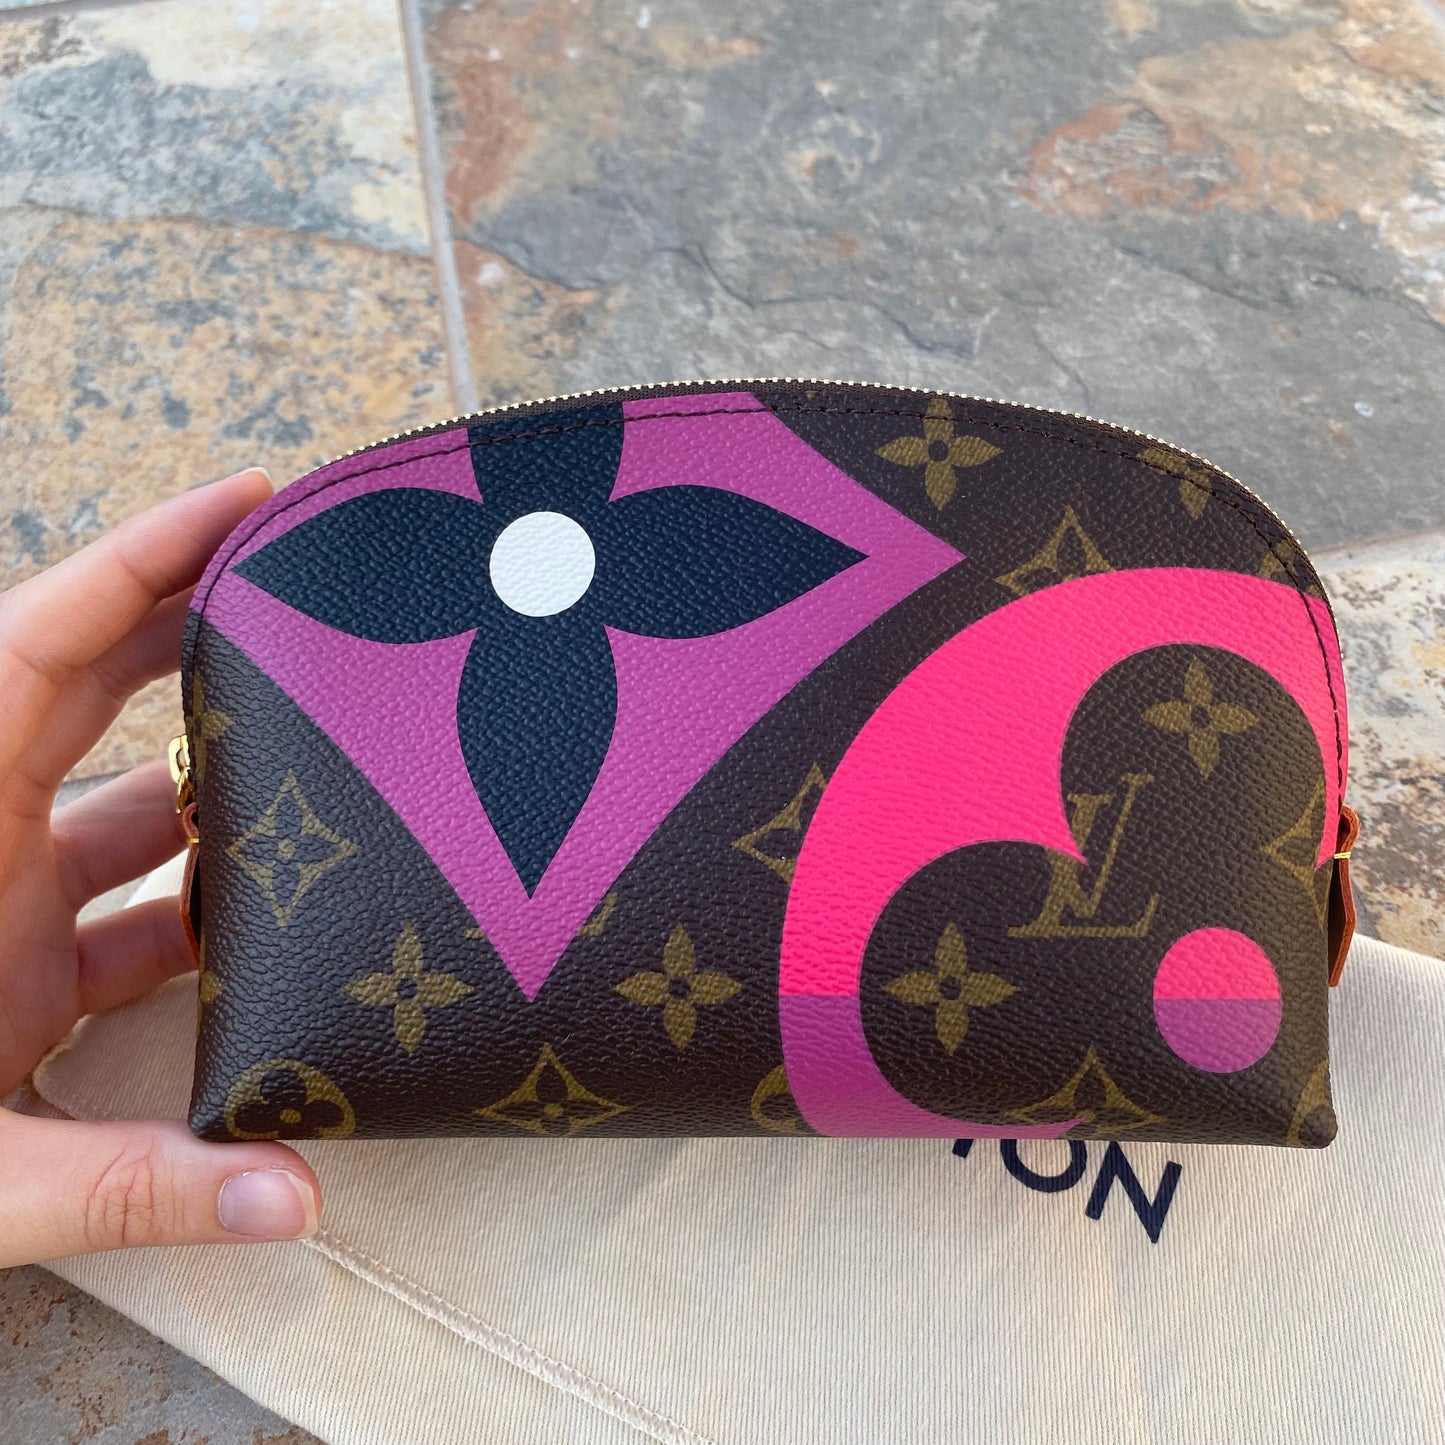 Louis Vuitton Game On Cosmetic Pouch